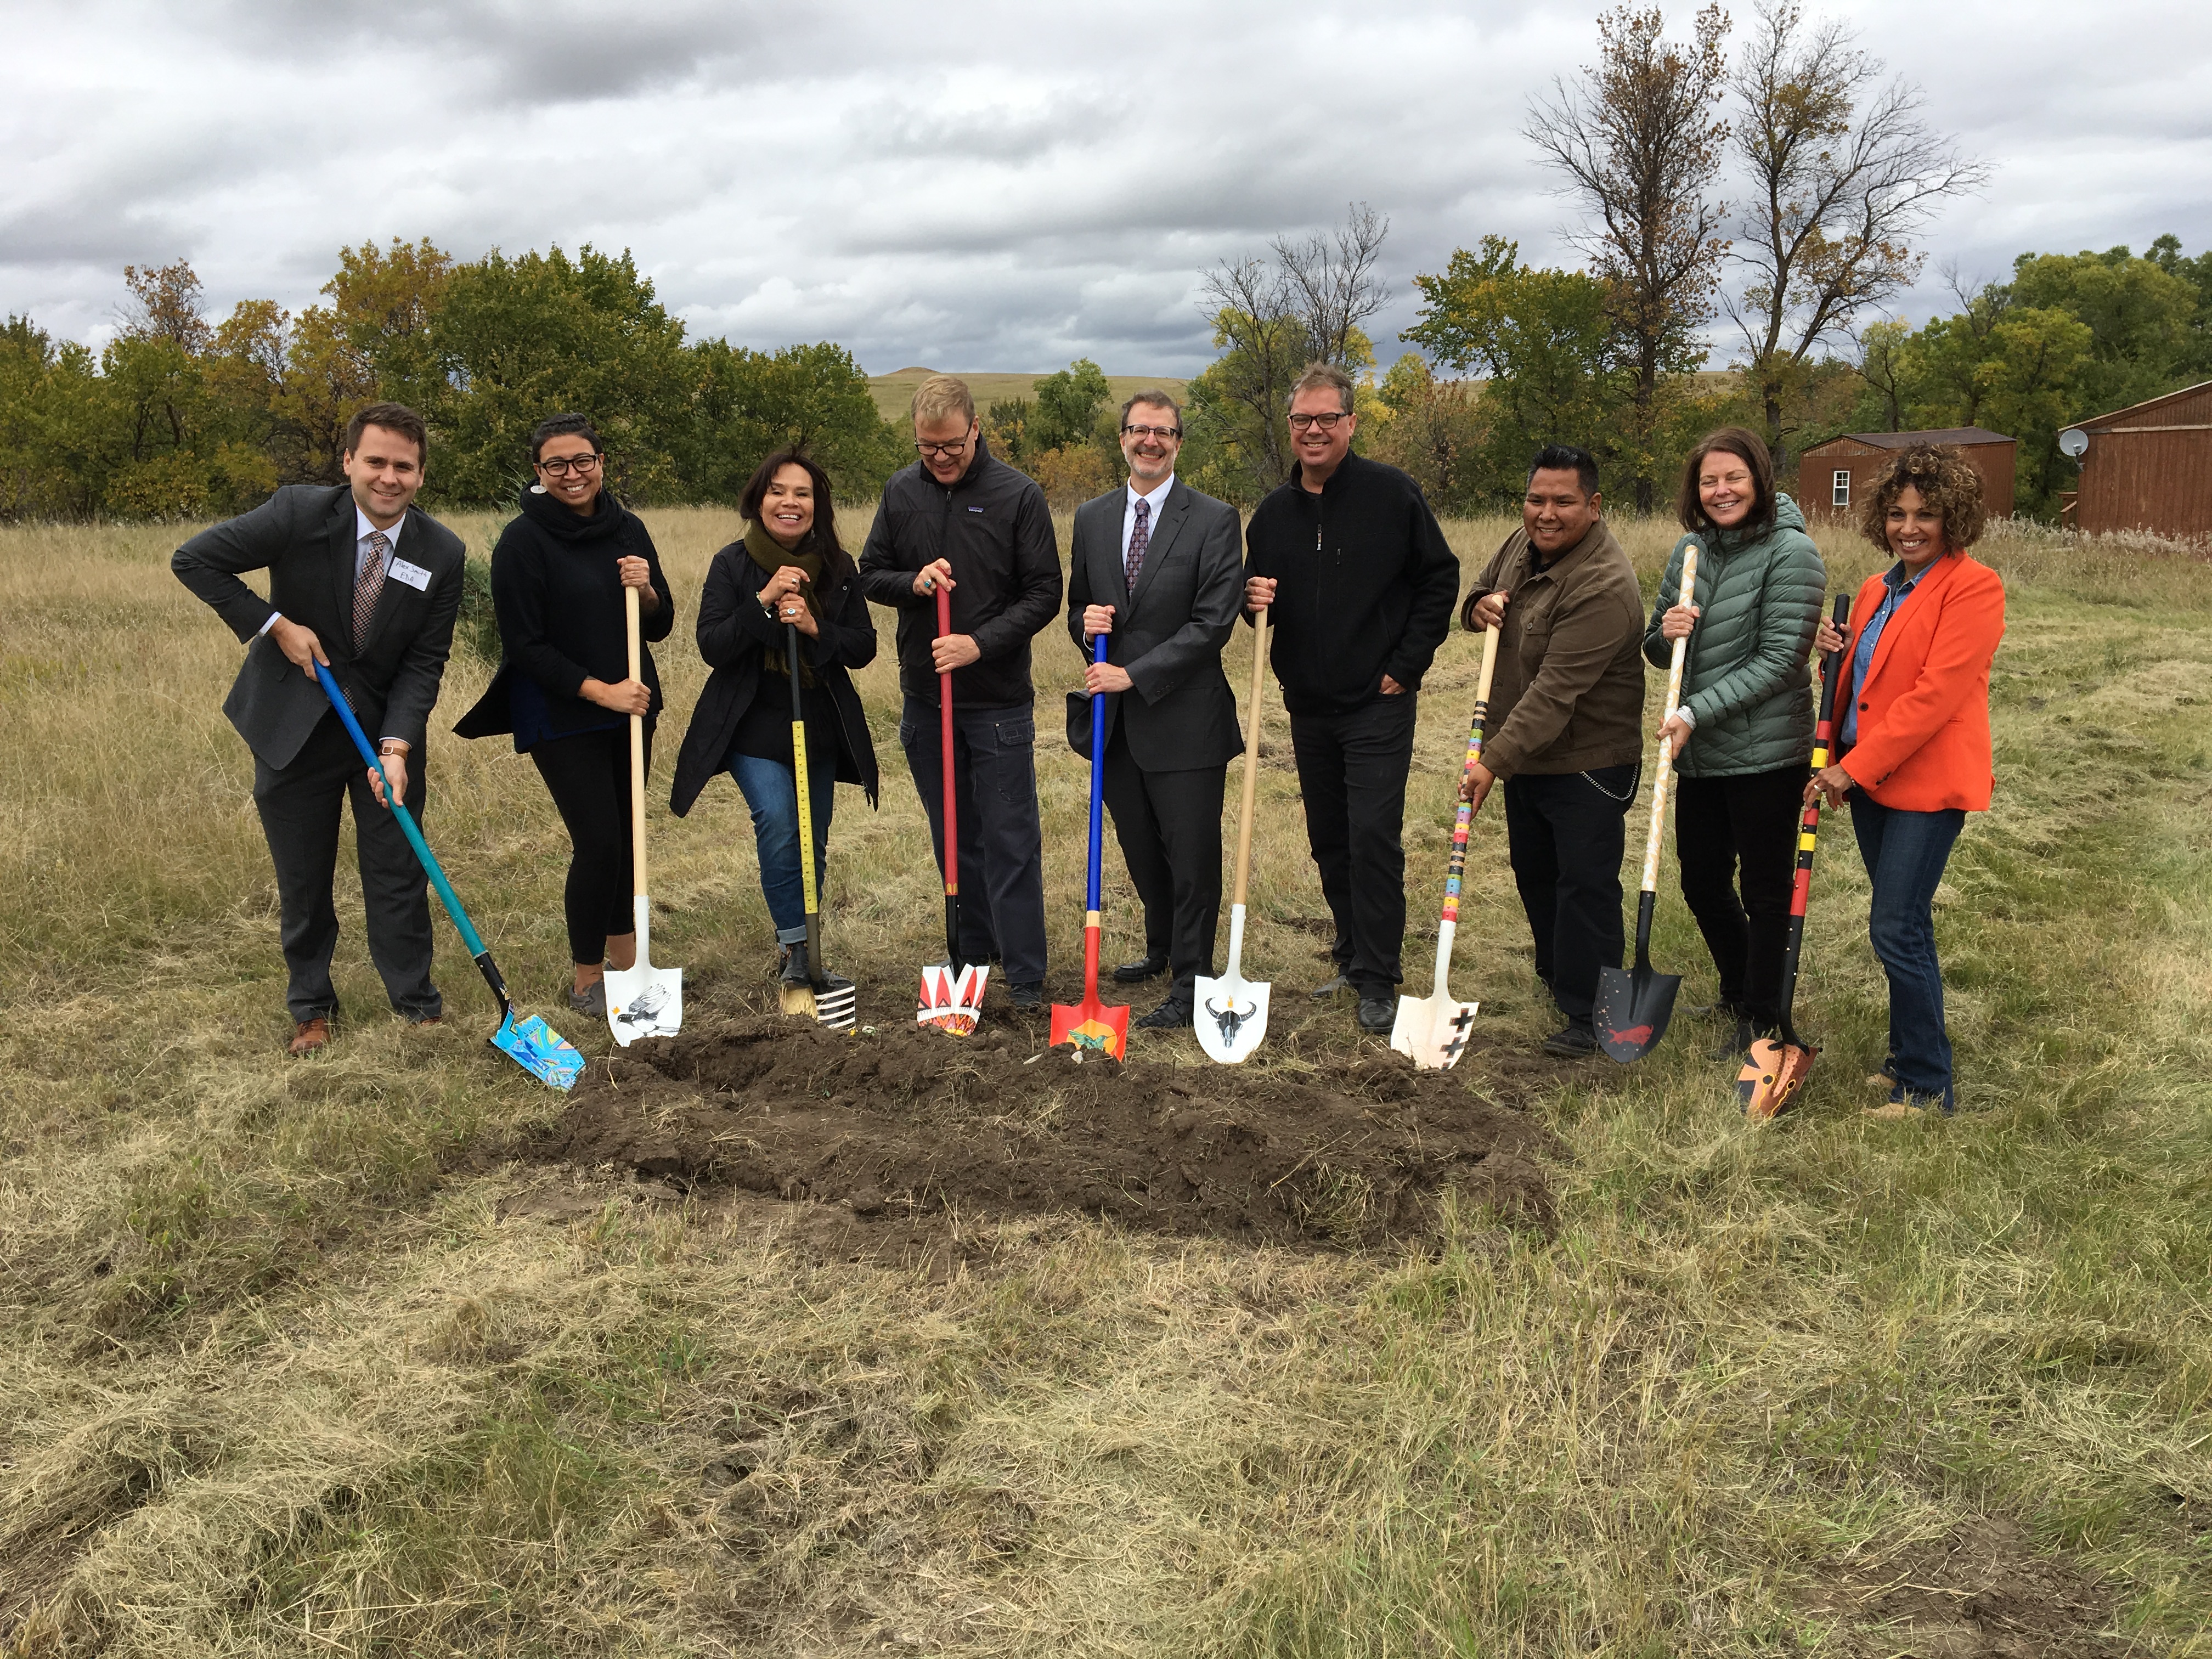 EDA DAS-RA Alvord, (c) breaks ground on the Artspace project with leaders from the Oglala Lakota Tribe, Lakota Funds, Artspace, and The First Peoples Fund